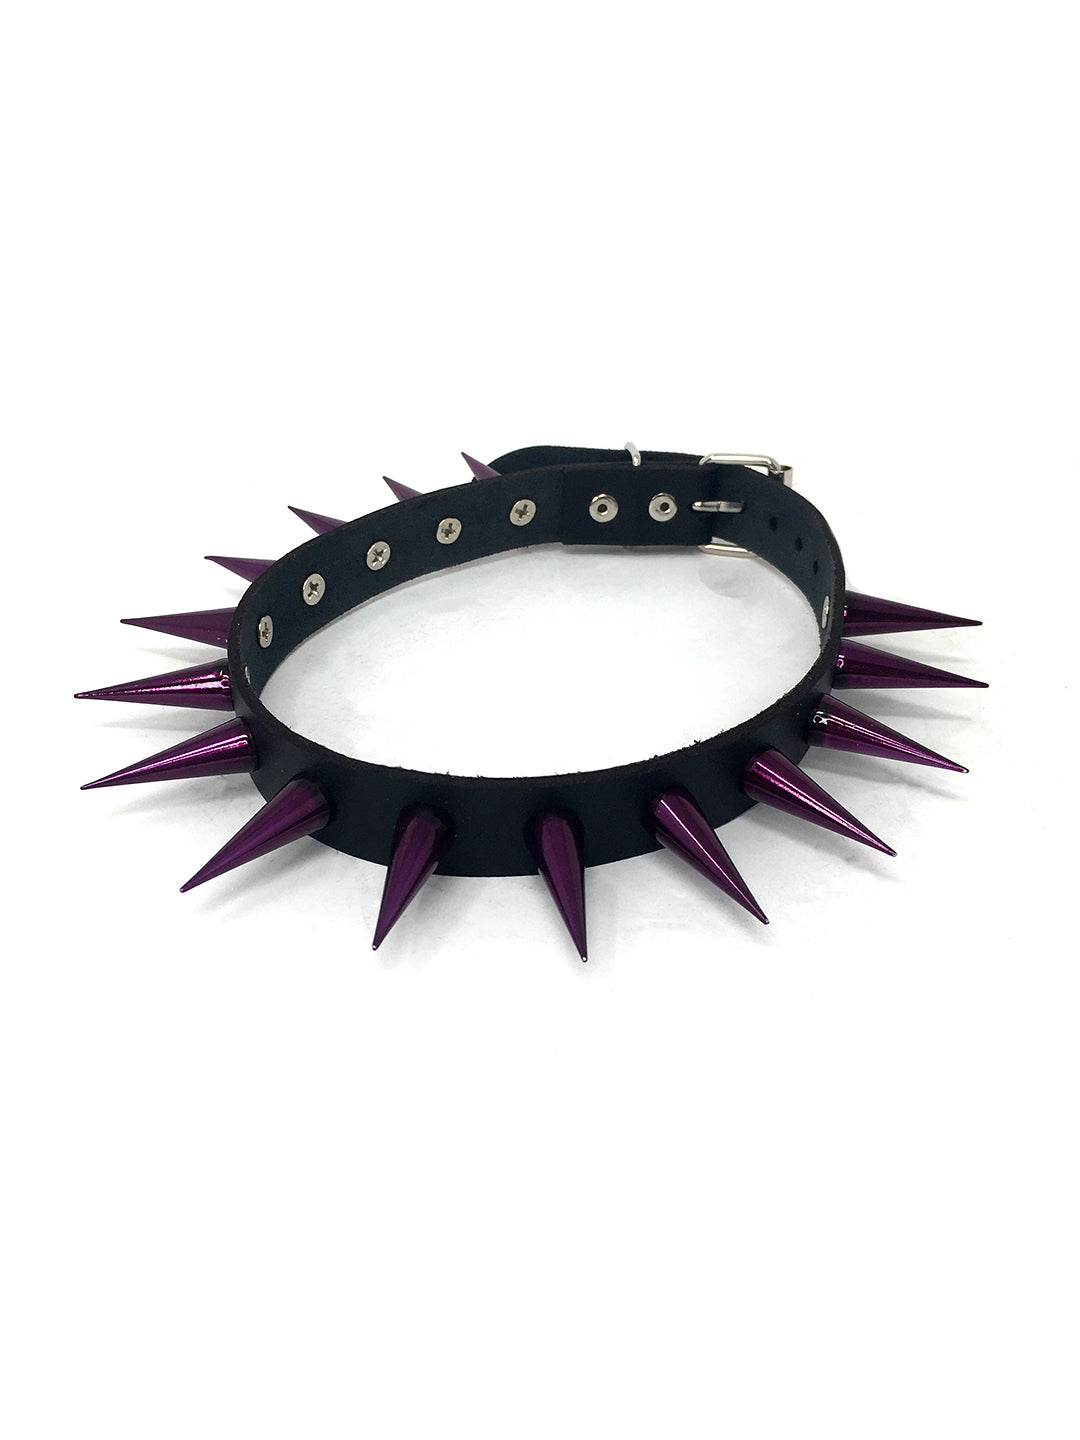 Leather Spiked Collar with Metallic Spikes